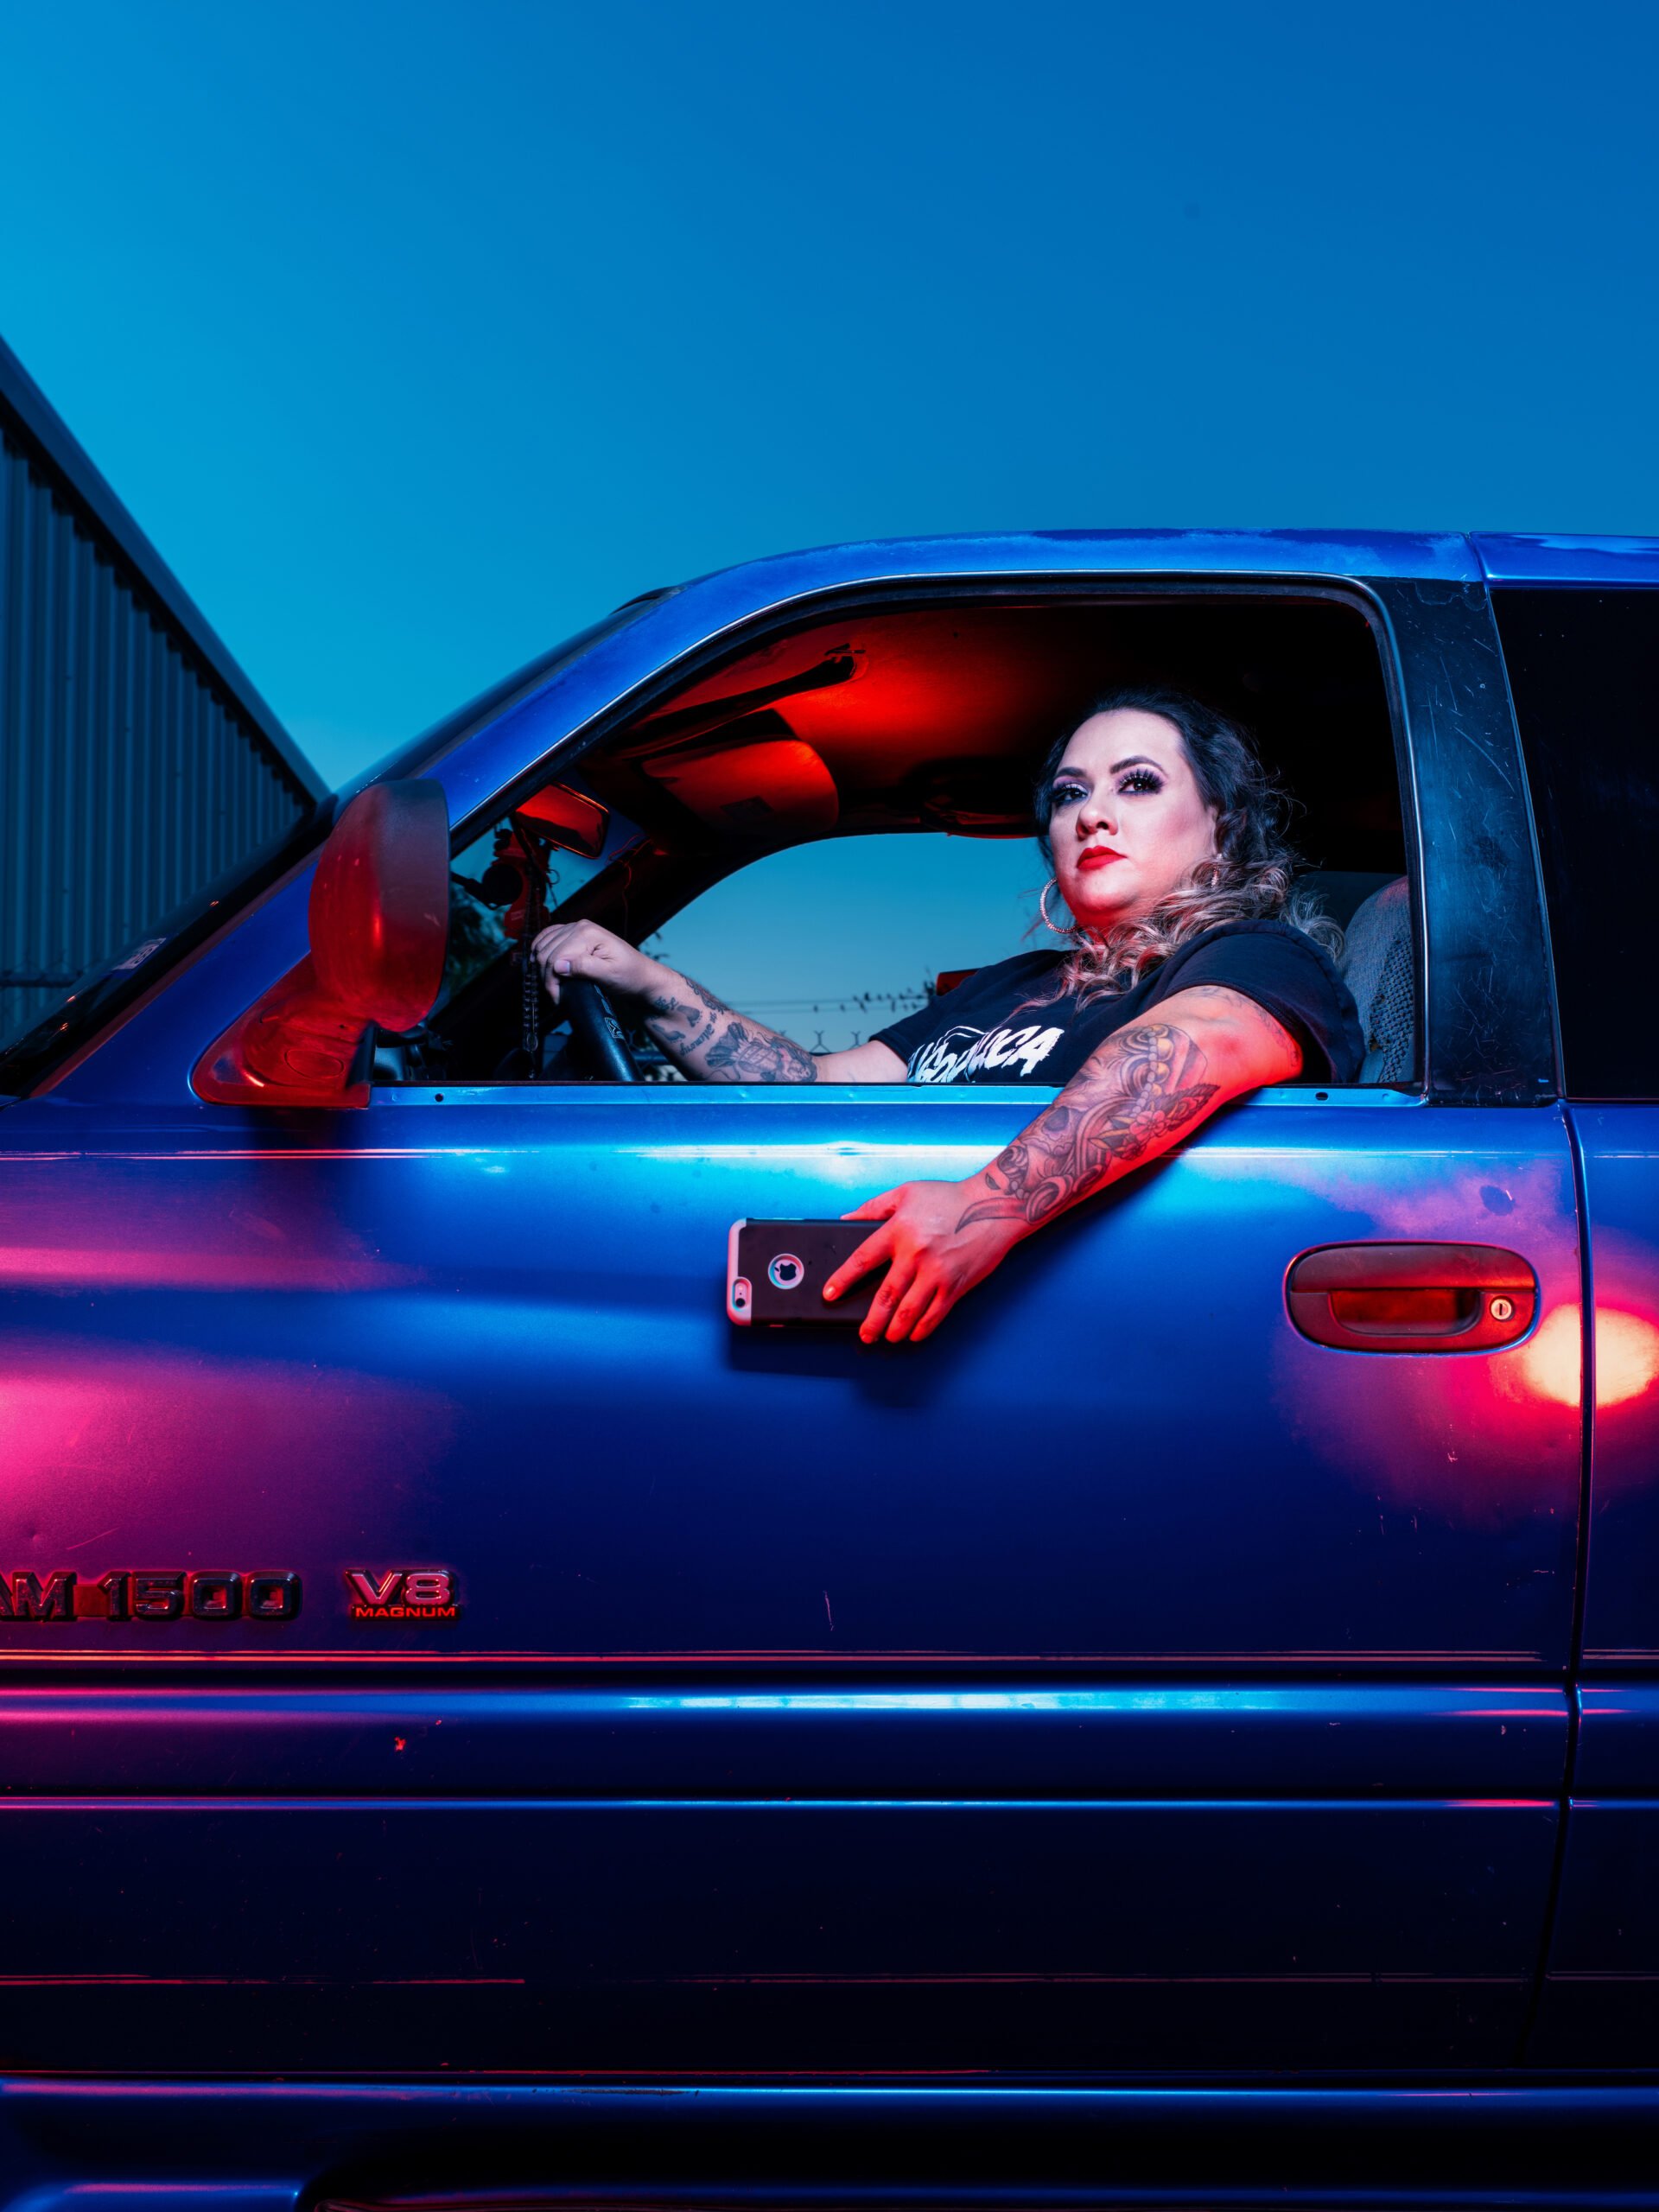 Priscilla Villarreal, or La Gordiloca, a Latino woman, holds a smartphone in her hand out the window of her car. The photo is filtered to create sharp edges and starkly contrasting, deep colors. Villarreal is visible from the waist up, in a black graphic tee, wearing red lipstick and bold makeup, with extensive tattoos on her arms.